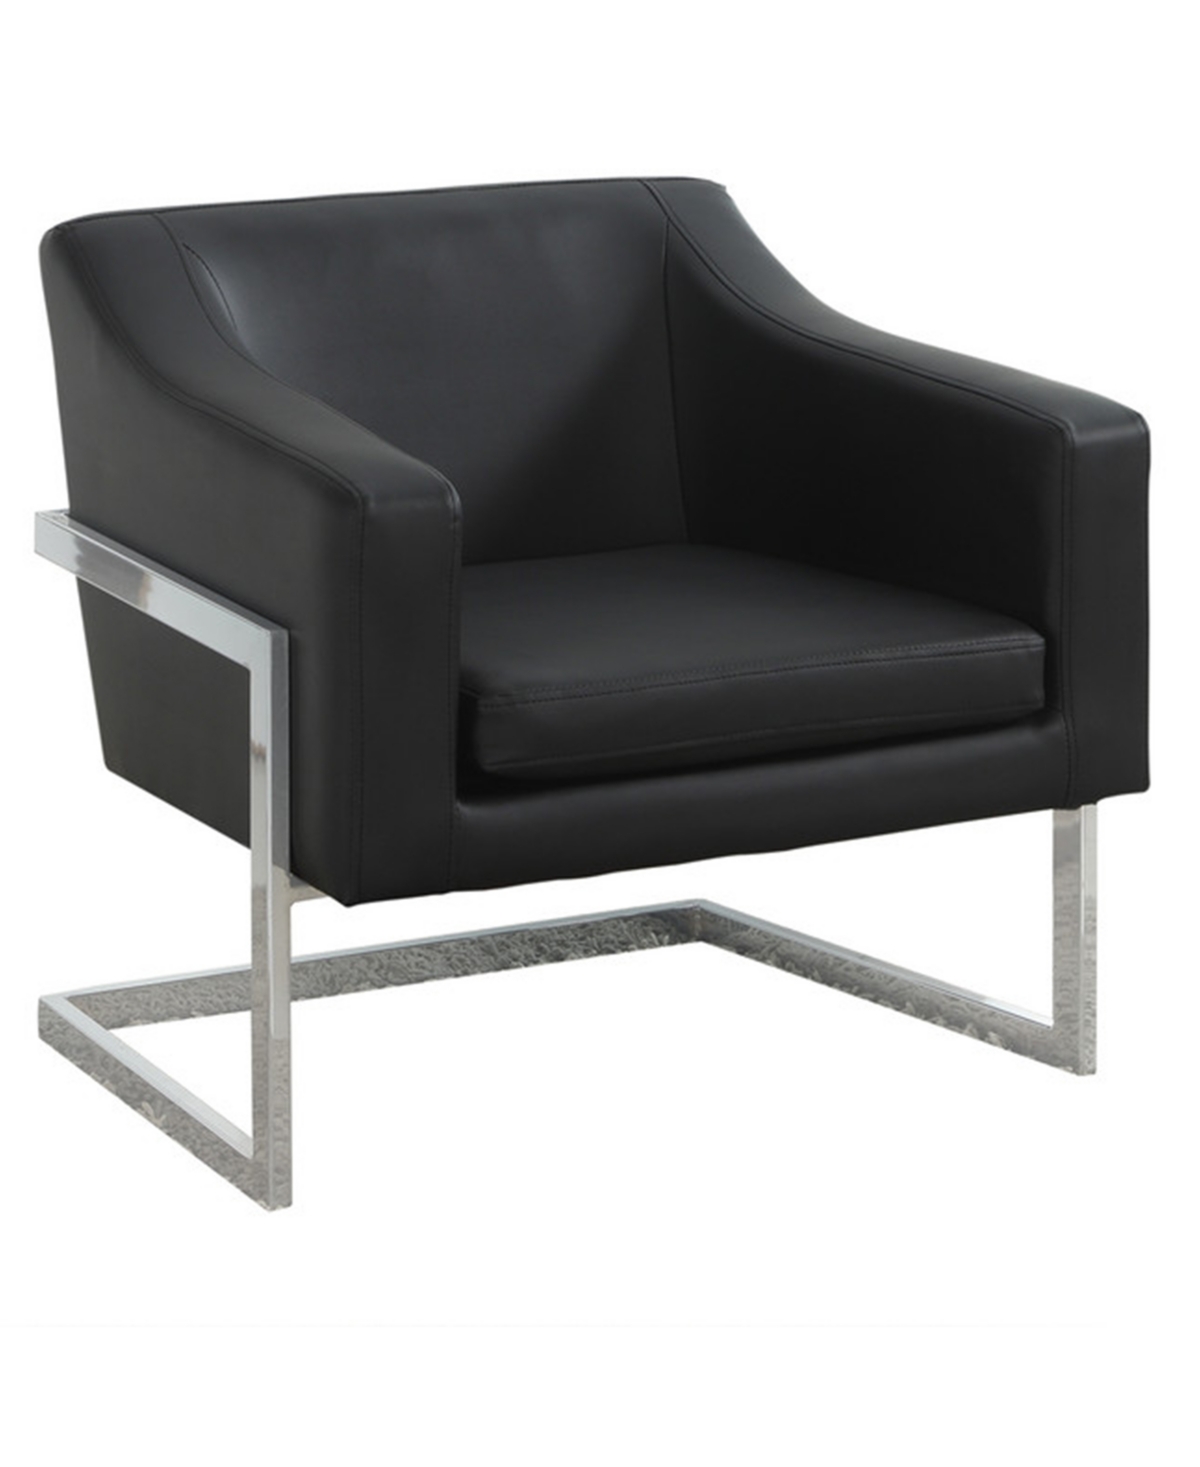 12857221 Irwin Modern Living Room Chrome Faux Leather Accen sku 12857221